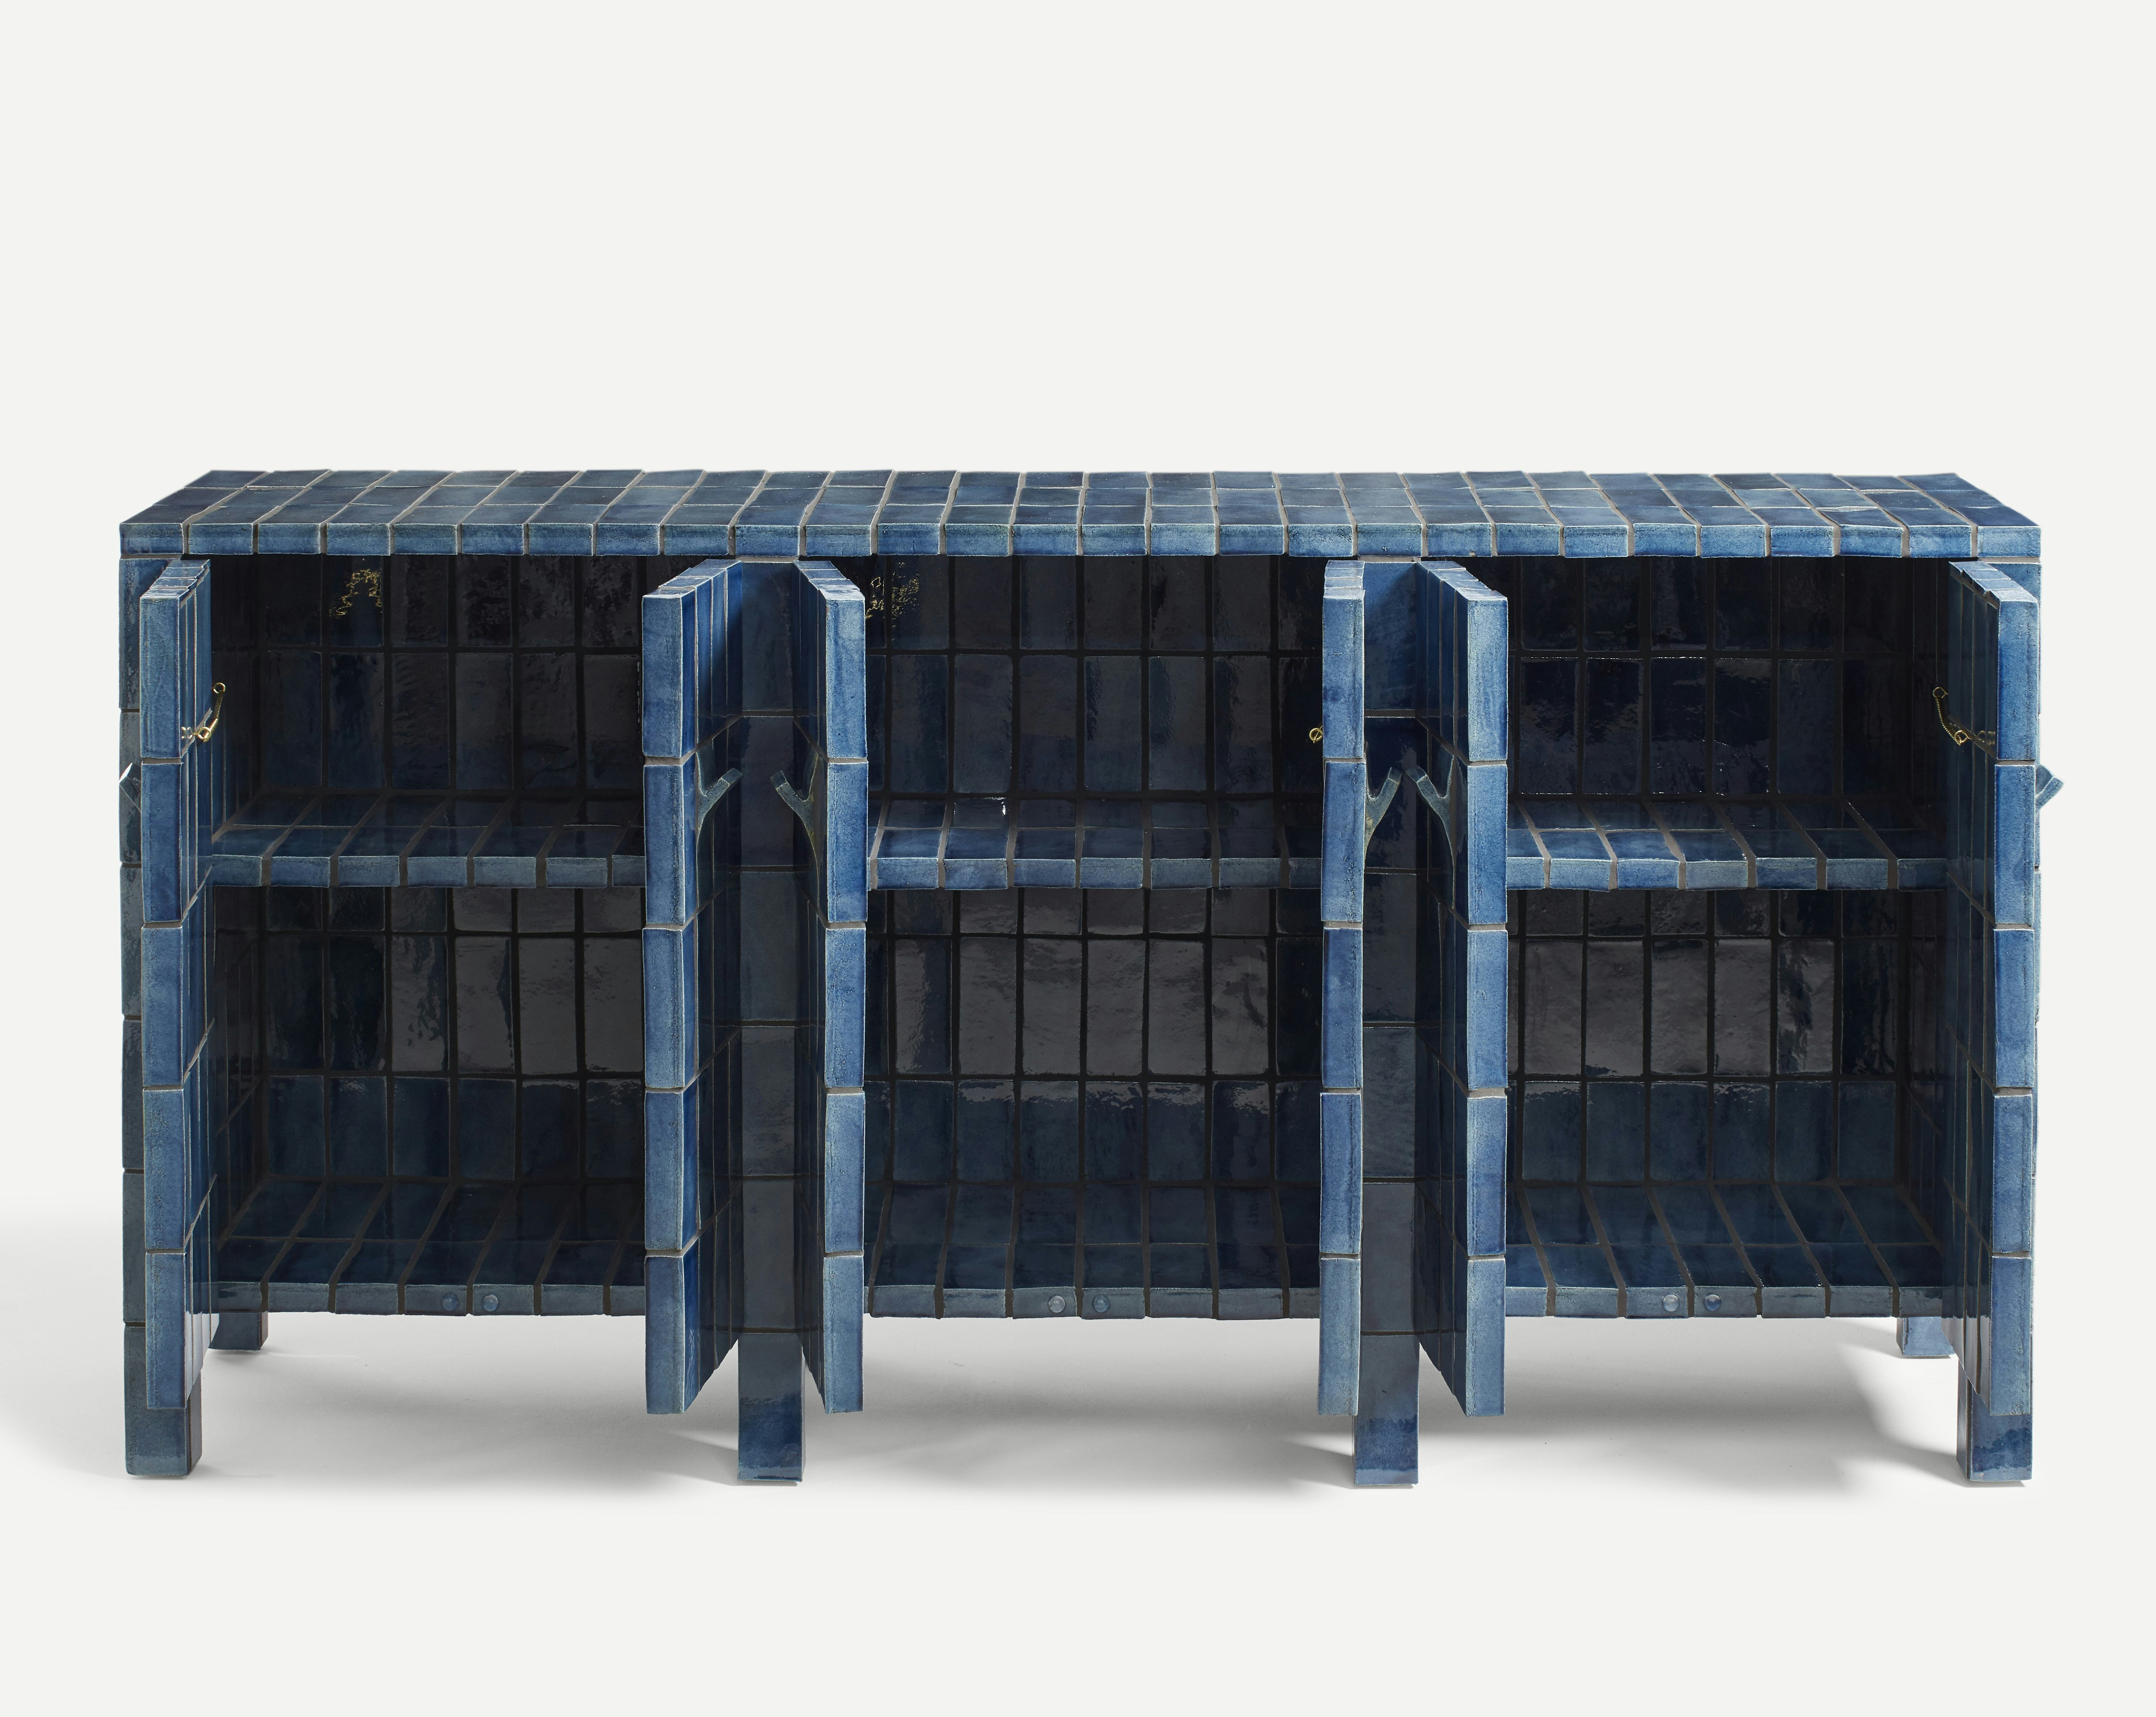 A sideboard clad in handmade blue tiles with its six doors standing open